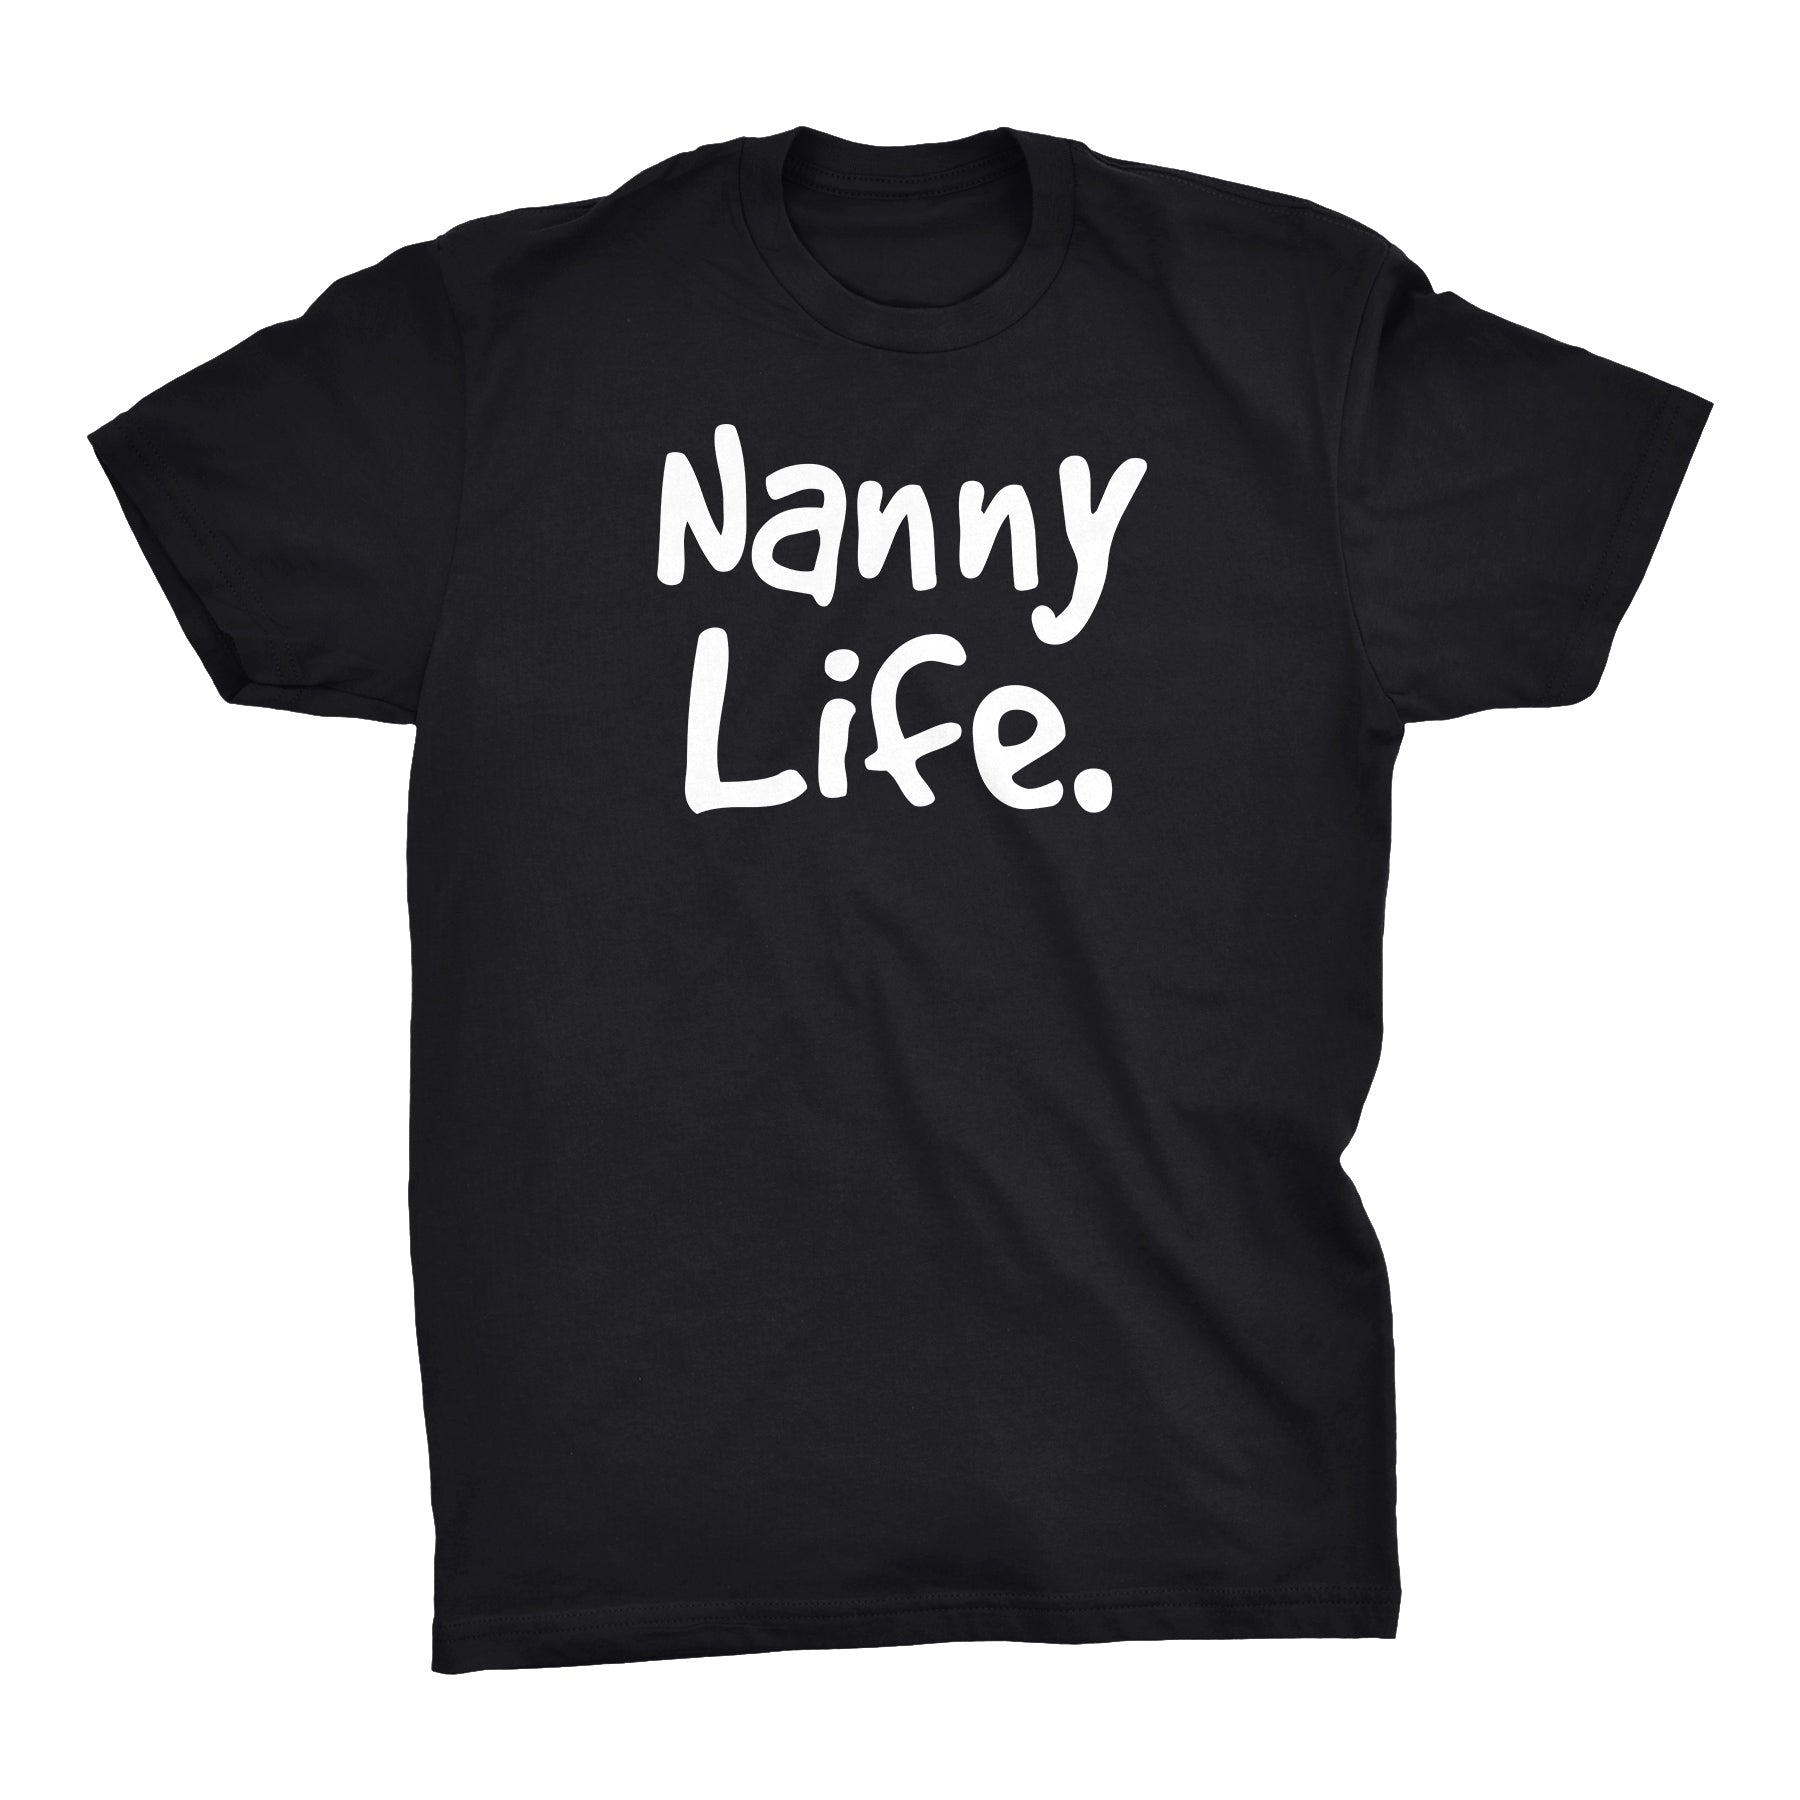 Nanny Life - Mother's Day Gift Grandmother T-shirt 002